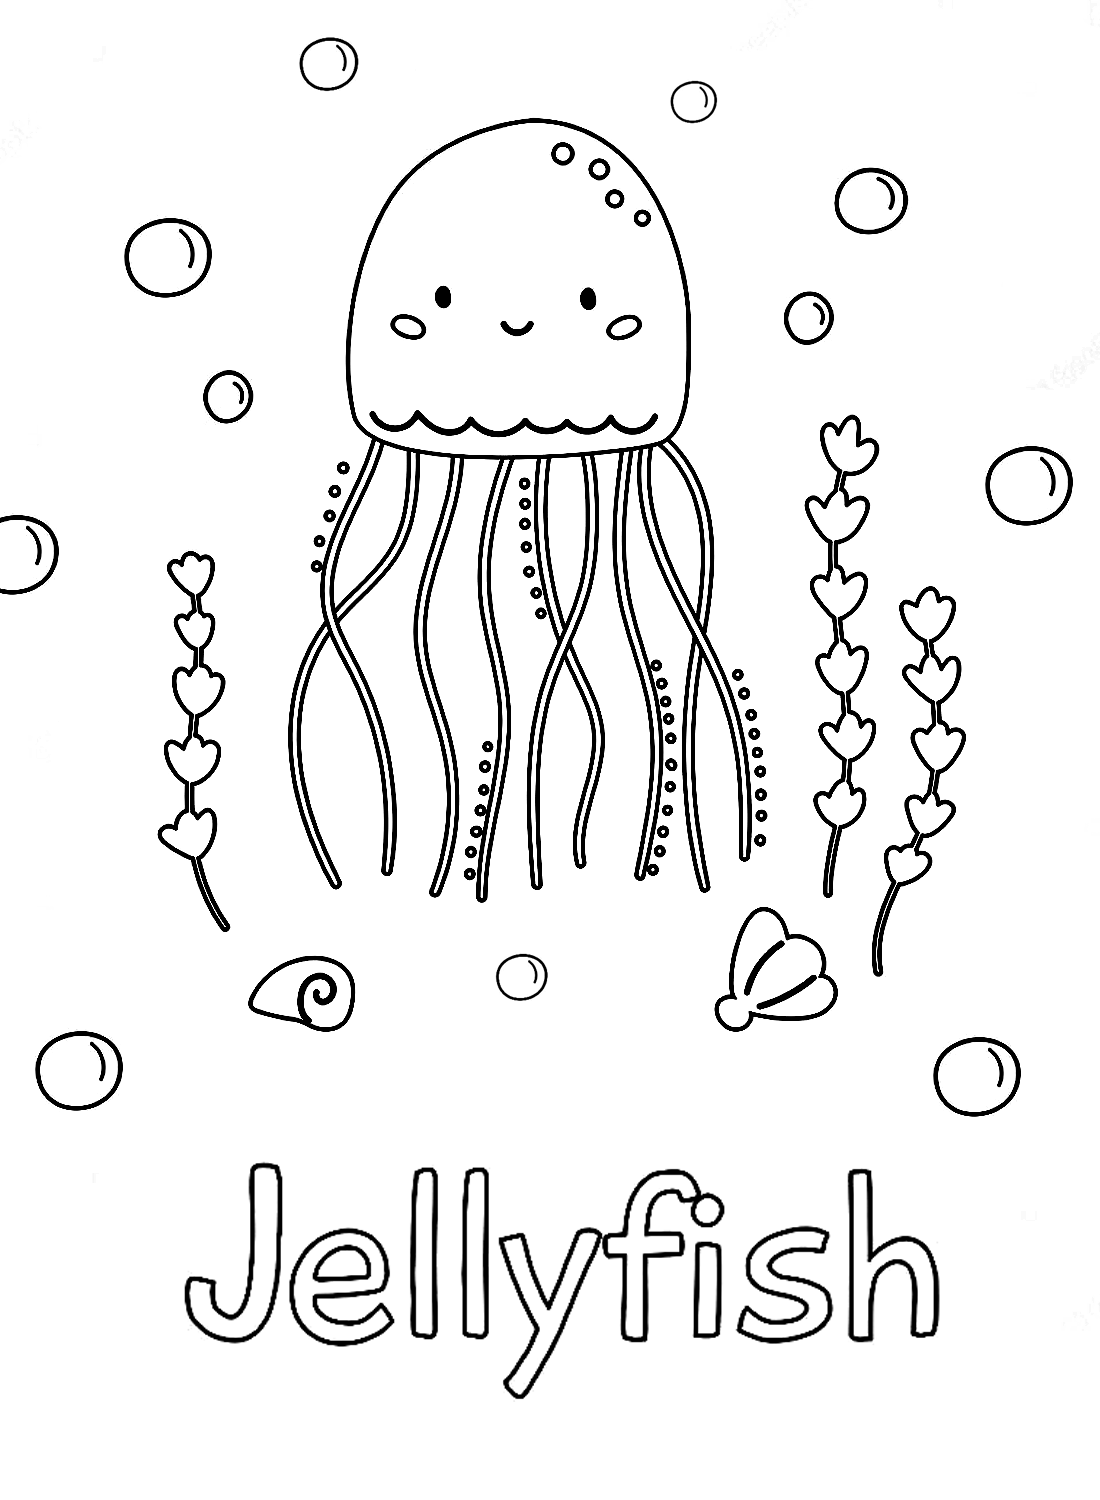 A Jellyfish Coloring Page